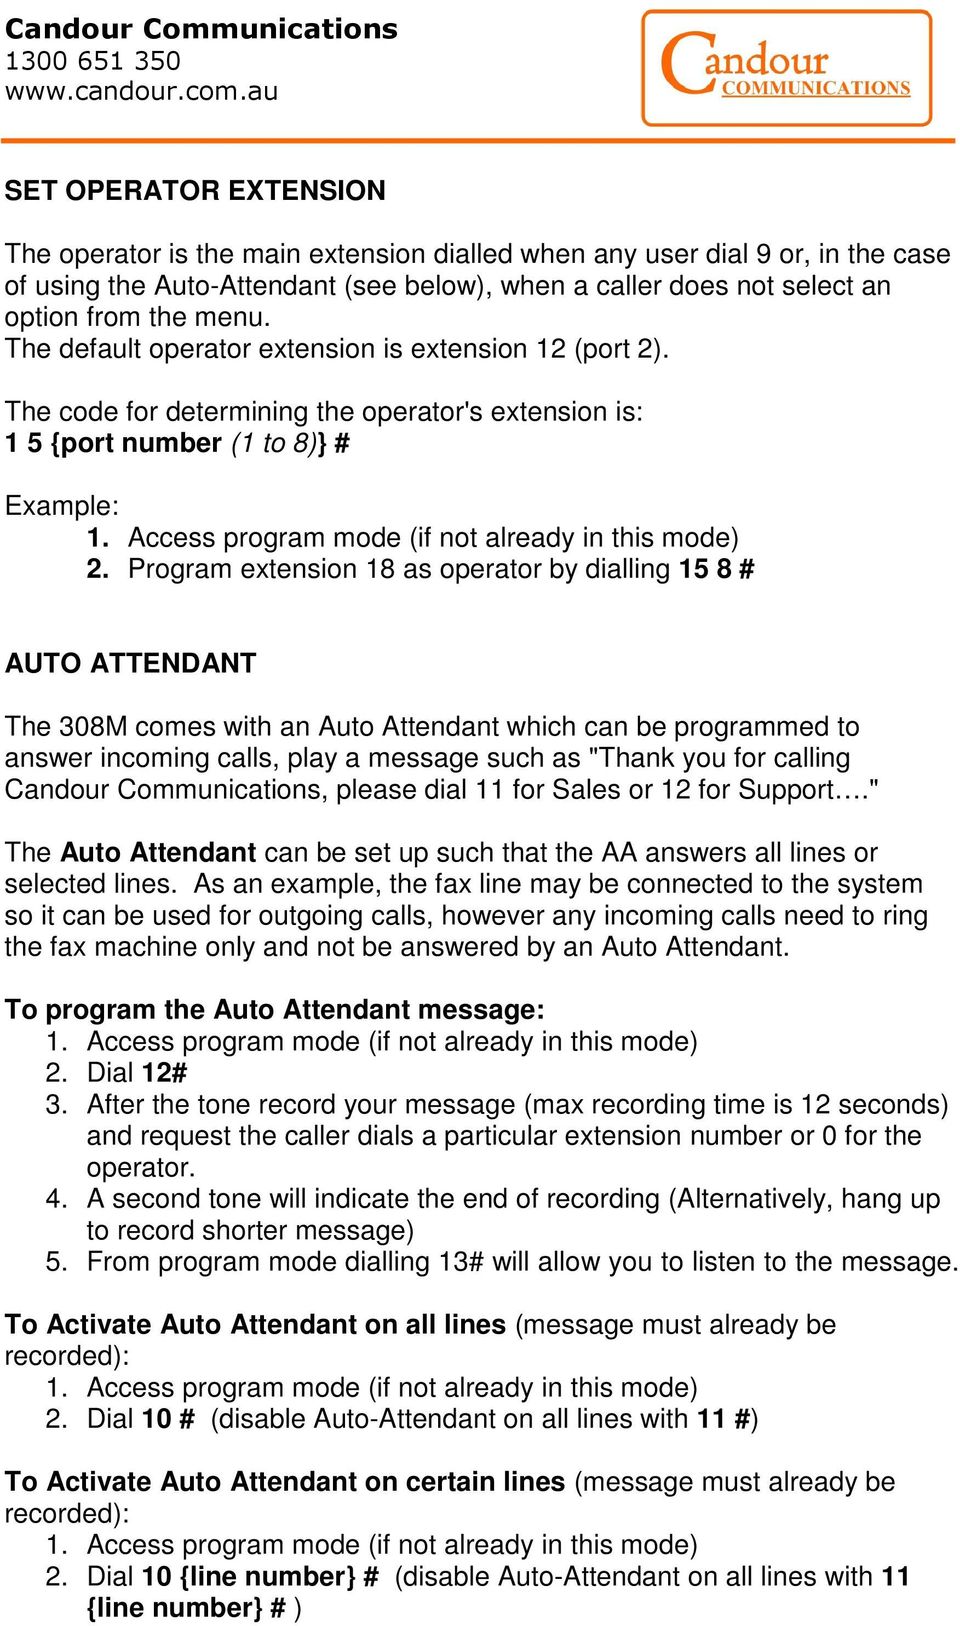 Program extension 18 as operator by dialling 15 8 # AUTO ATTENDANT The 308M comes with an Auto Attendant which can be programmed to answer incoming calls, play a message such as "Thank you for